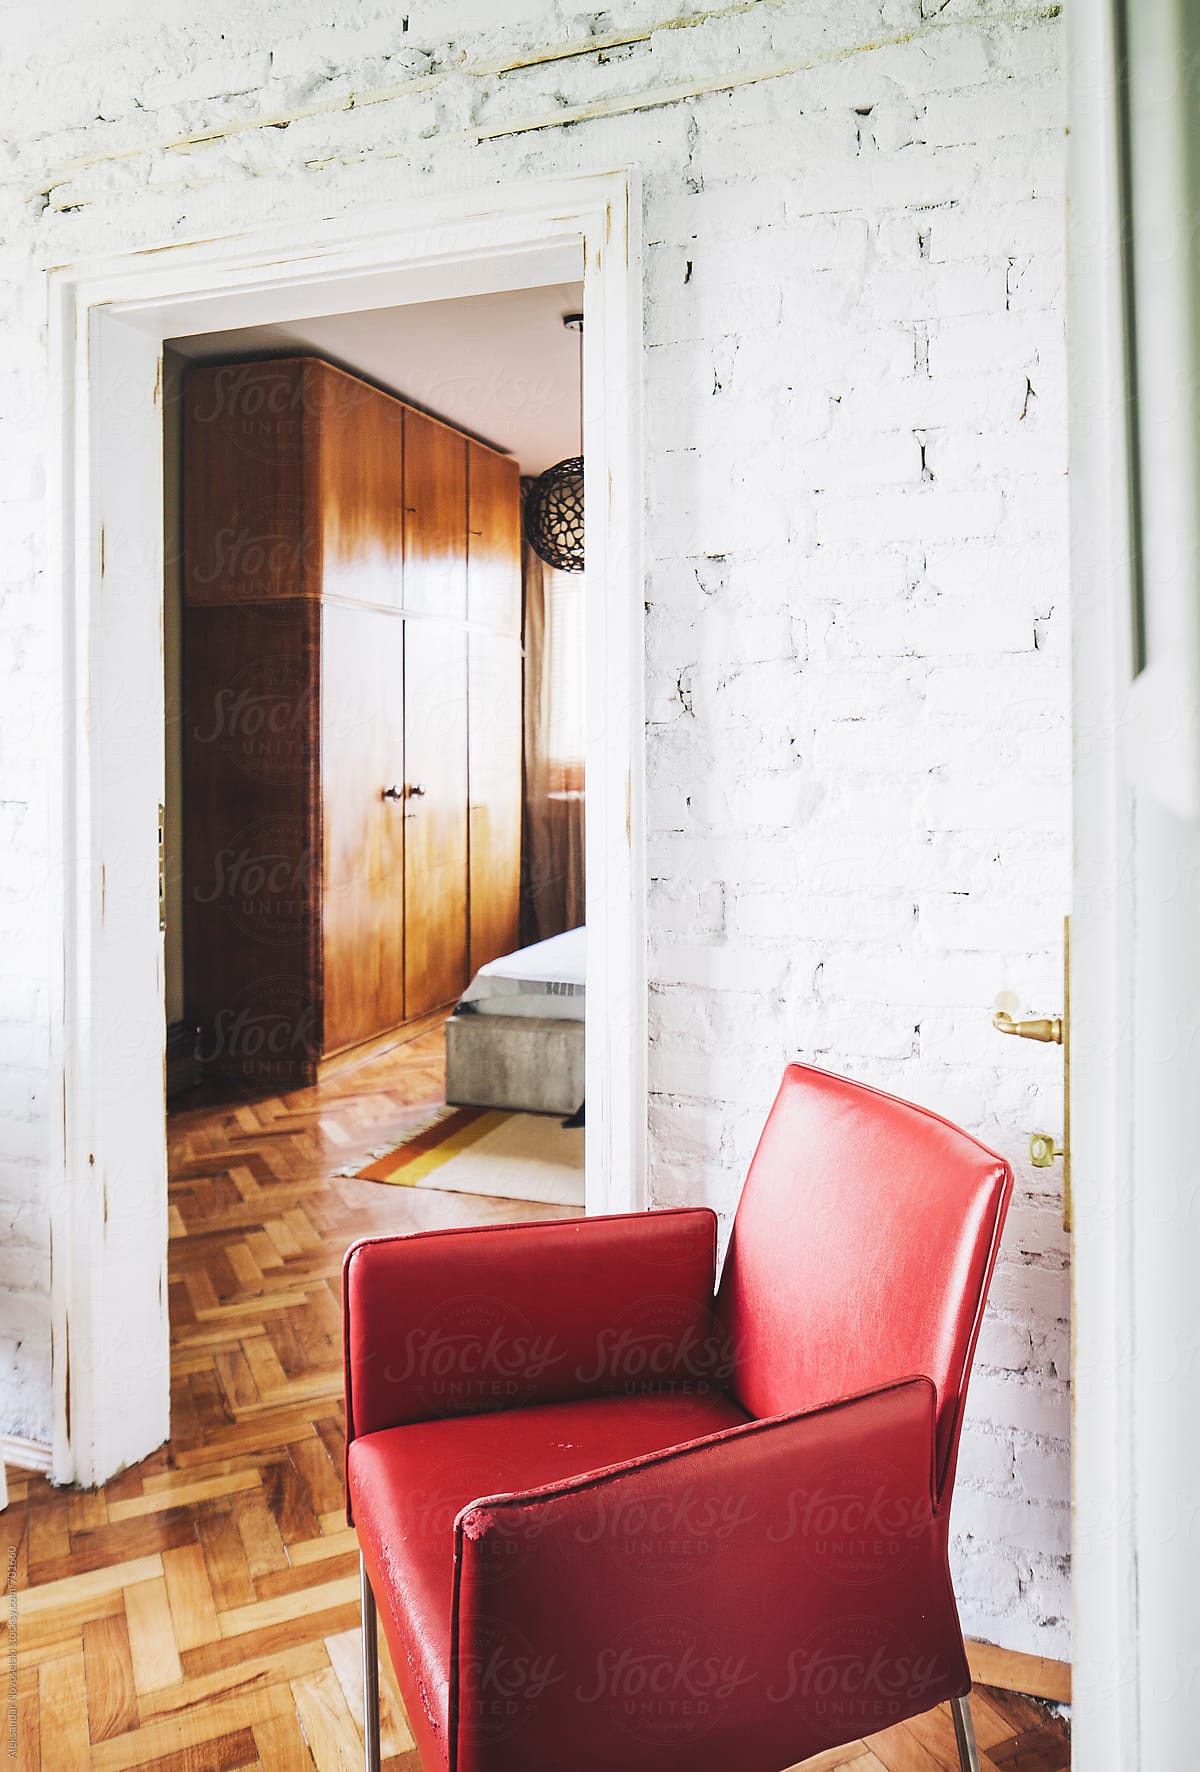 Red armchair and entry to bedroom in cosy interior